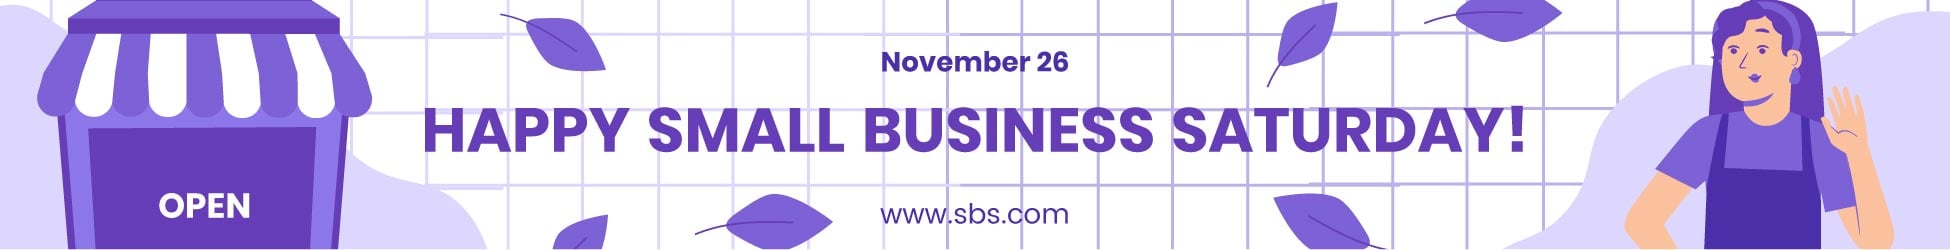 Small Business Saturday Website Banner